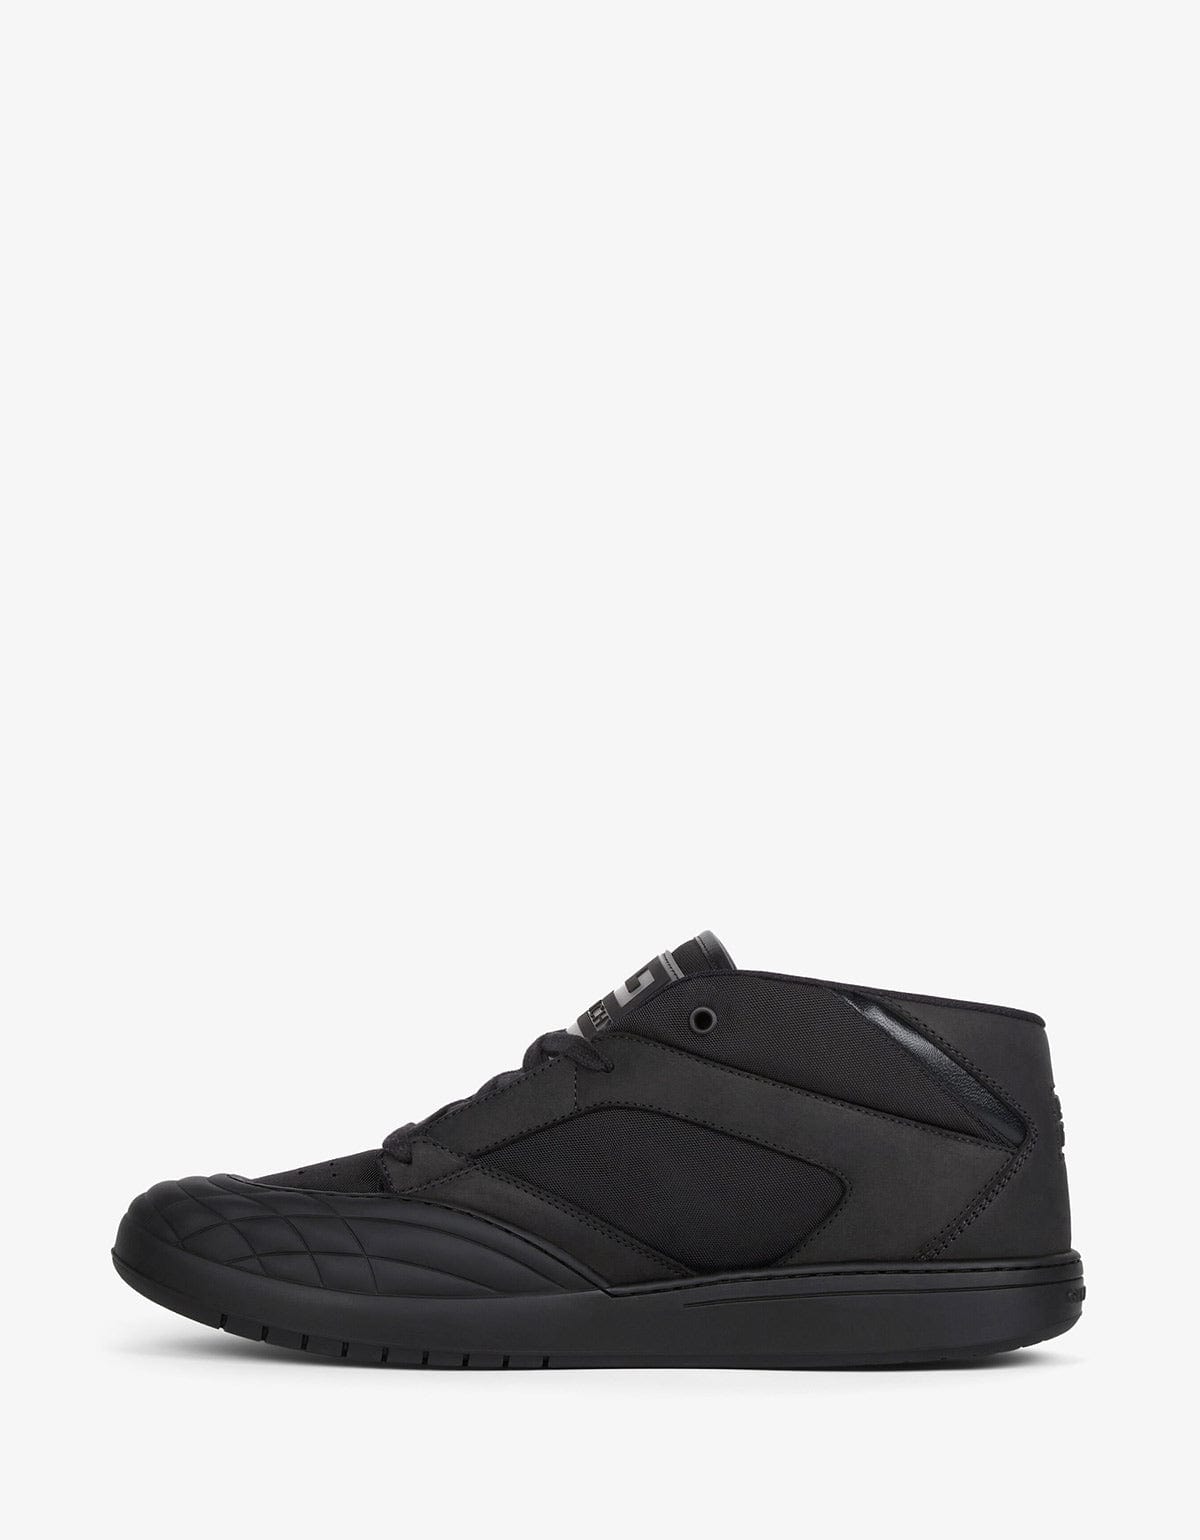 Givenchy Black Skate Trainers